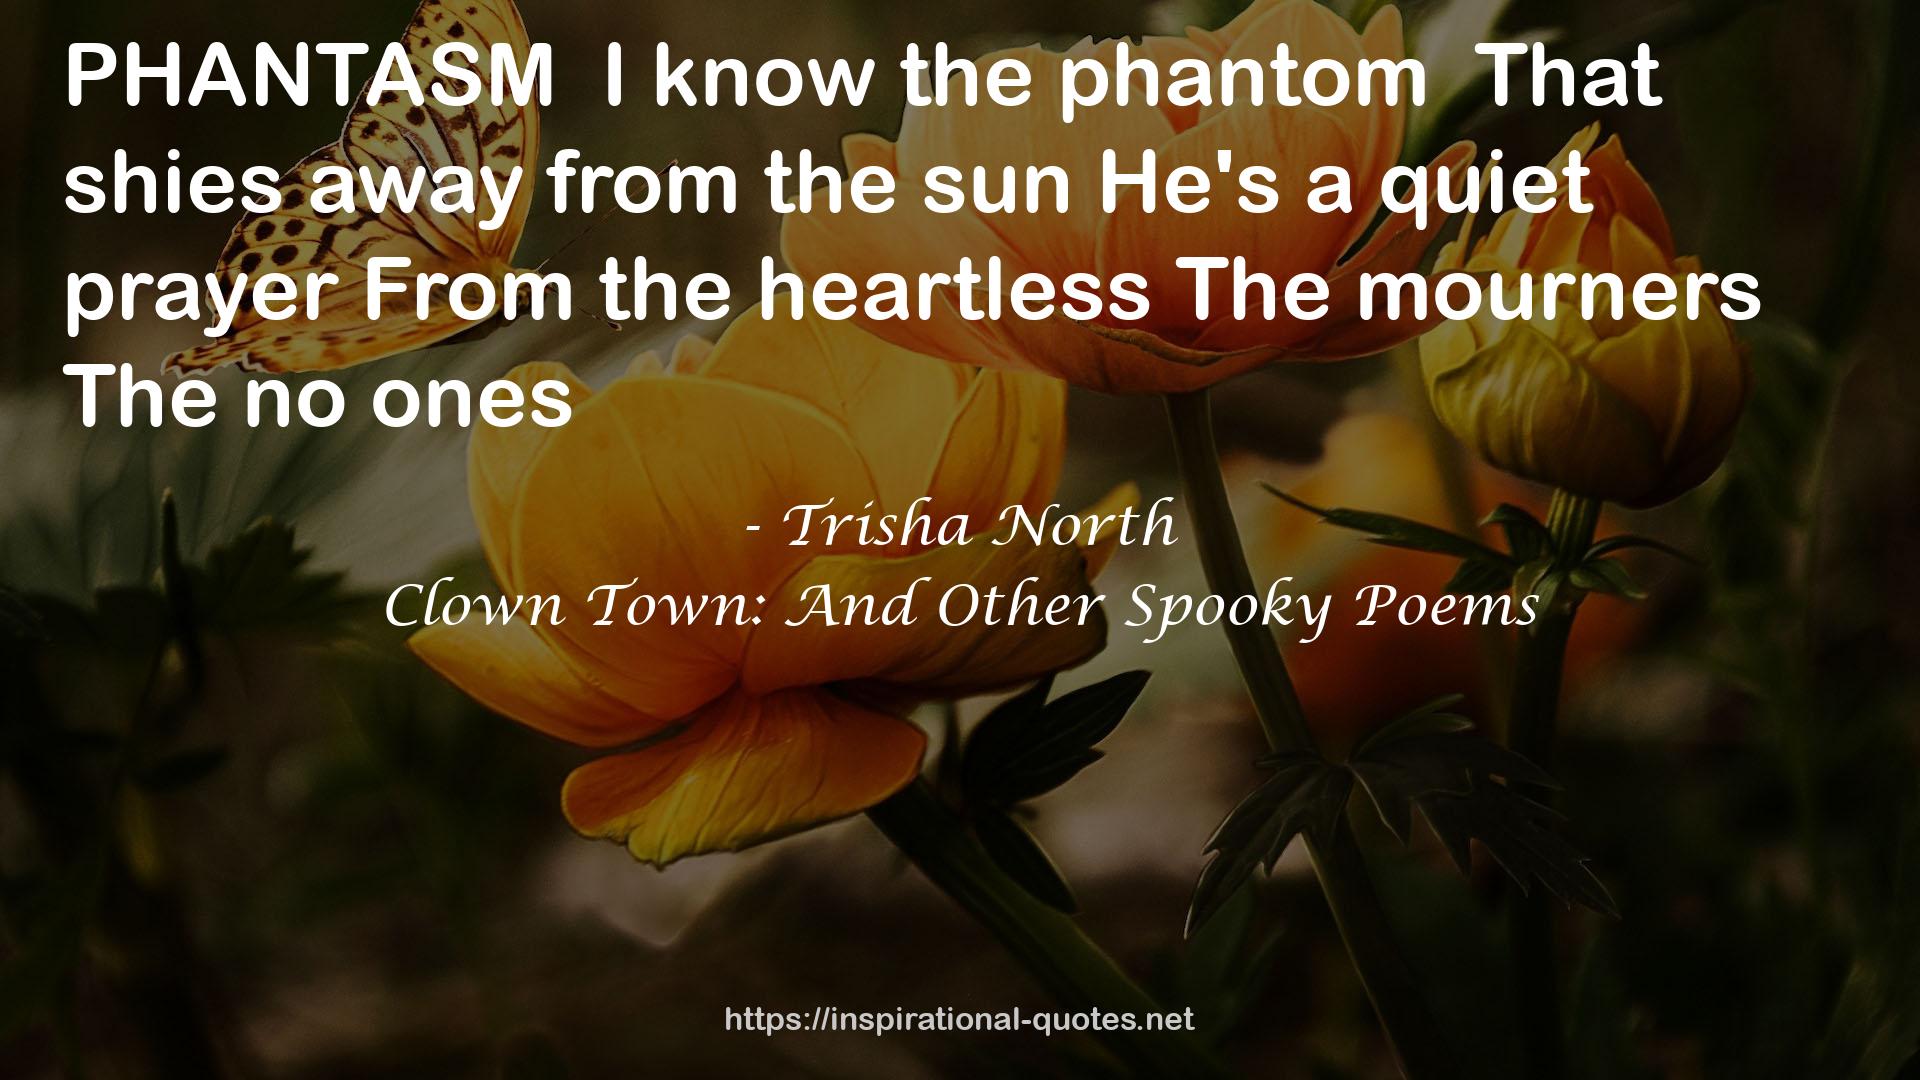 Clown Town: And Other Spooky Poems QUOTES